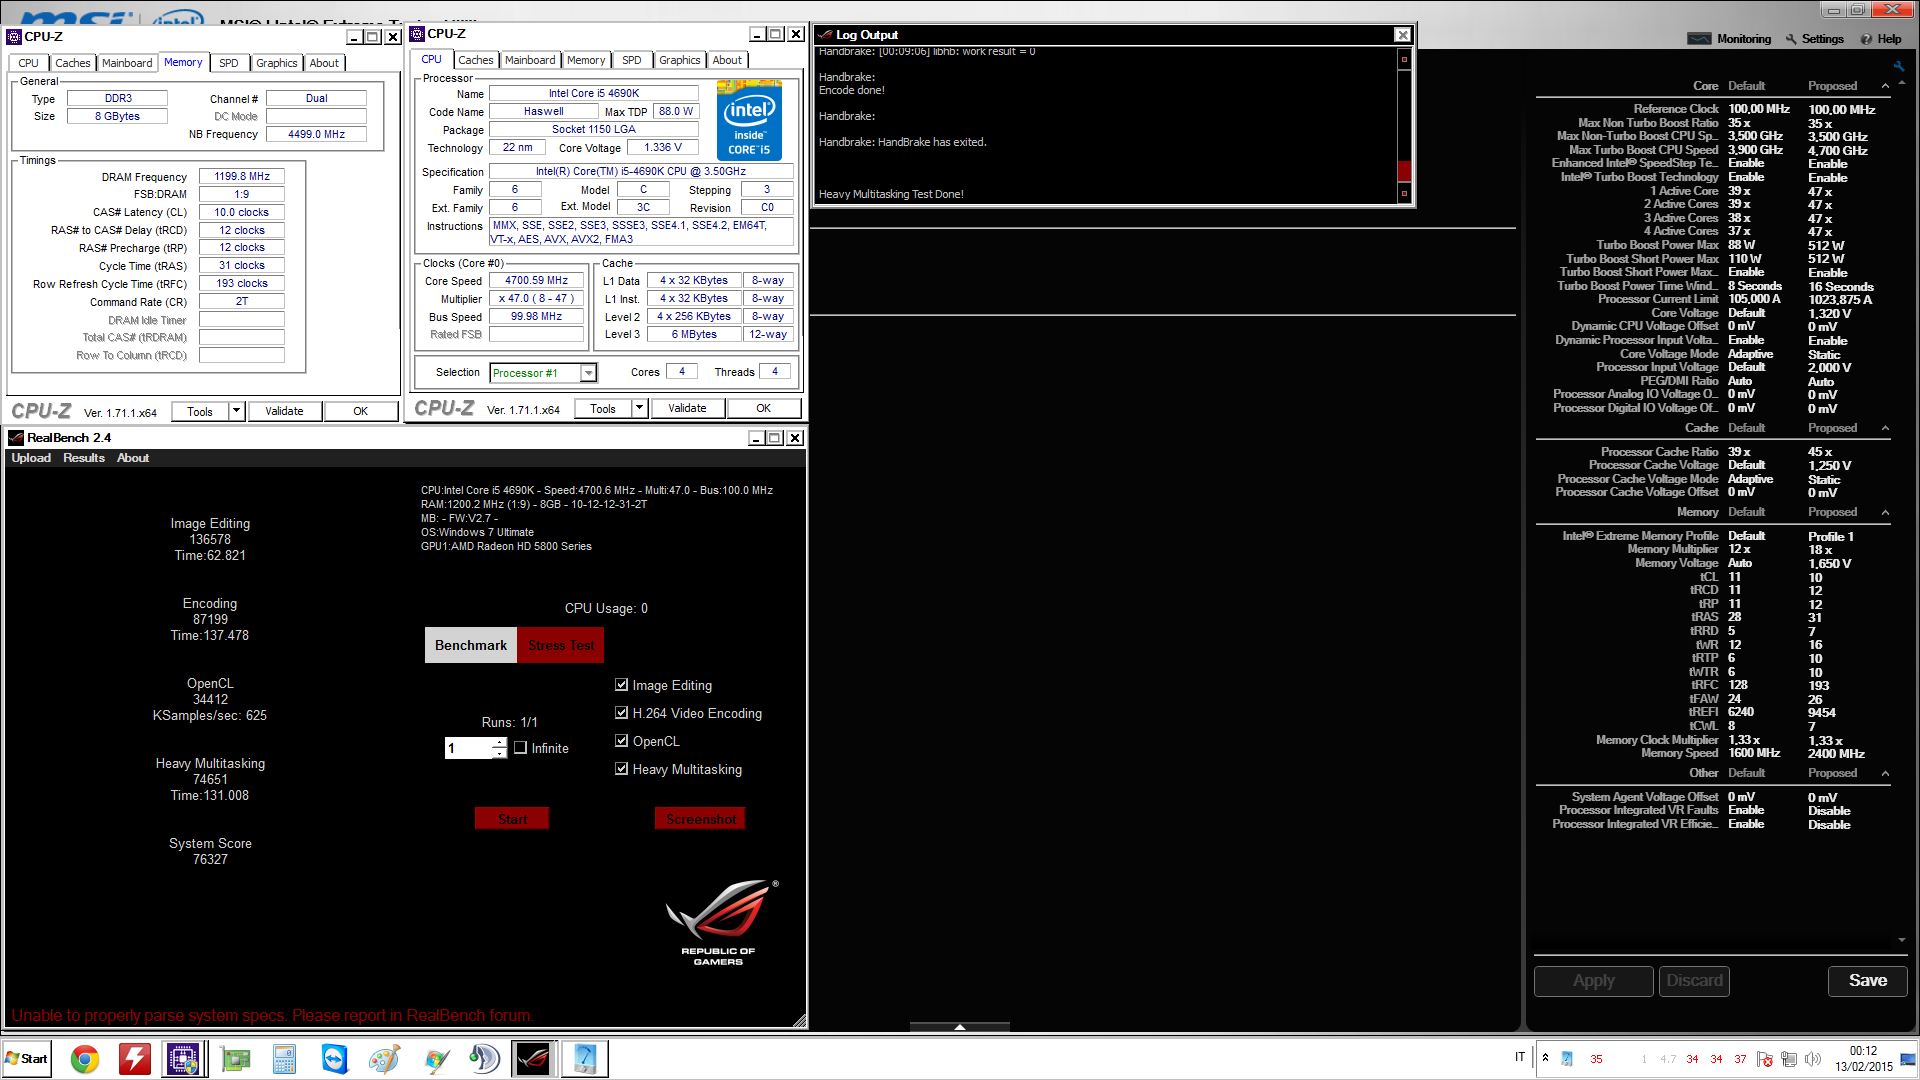 Niko993 S Realbench V2 Score 76327 Points With A Core I5 4690k